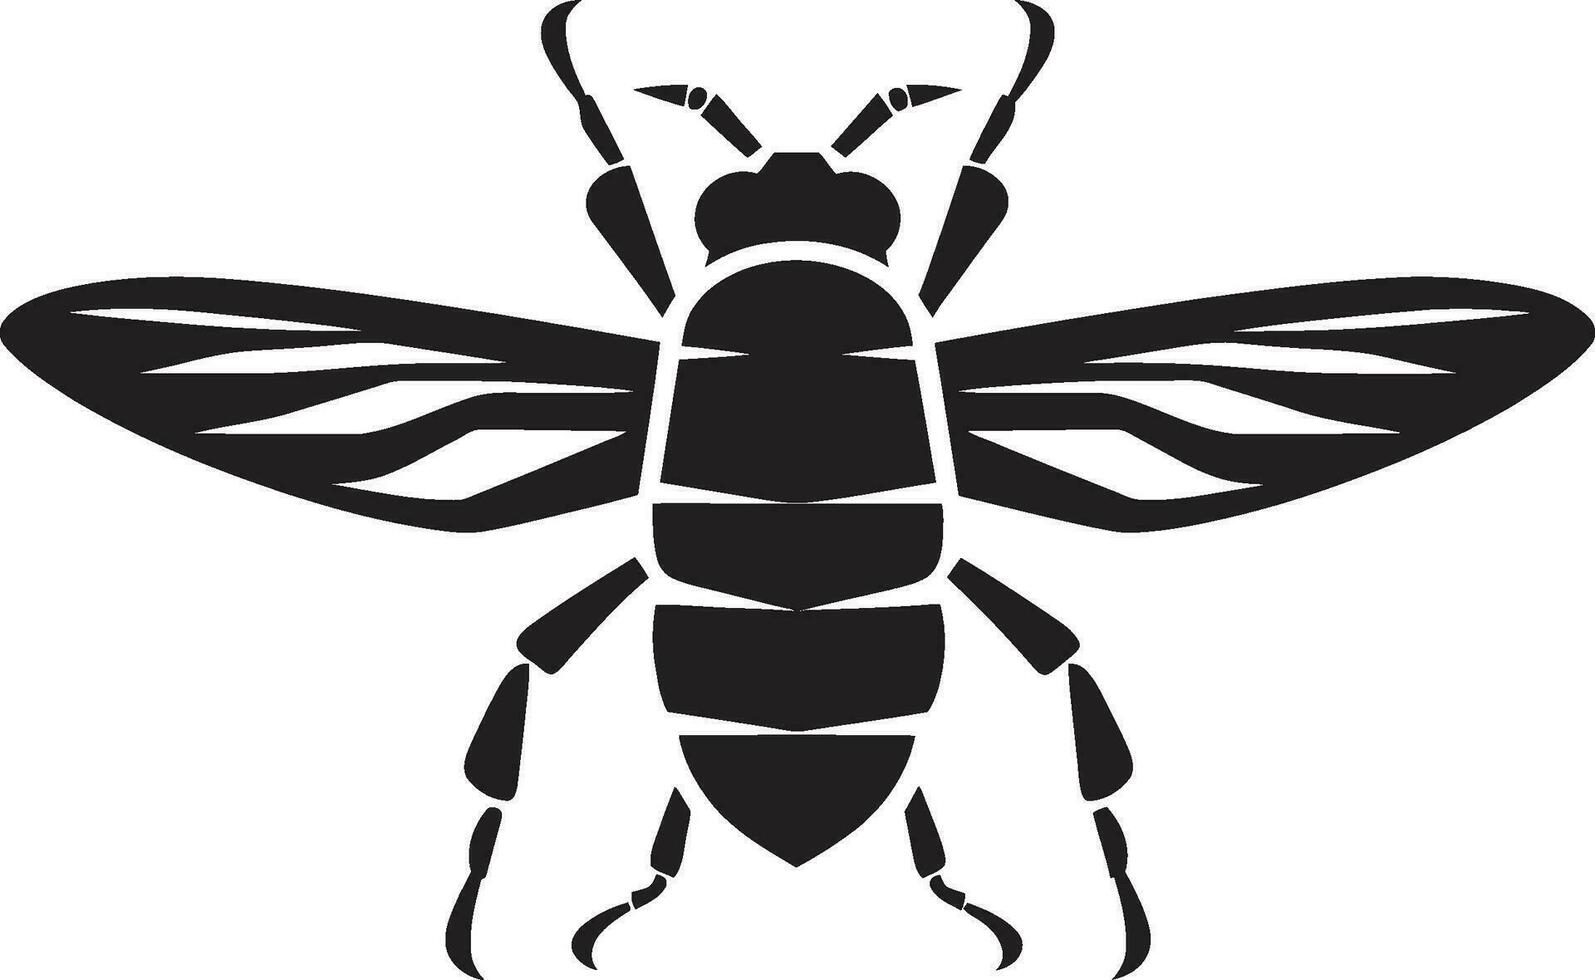 Elegance in the Night Cicada Symbol in Monochromes Tune Noir Natures Symphony Black Insect Emblem in Harmony vector